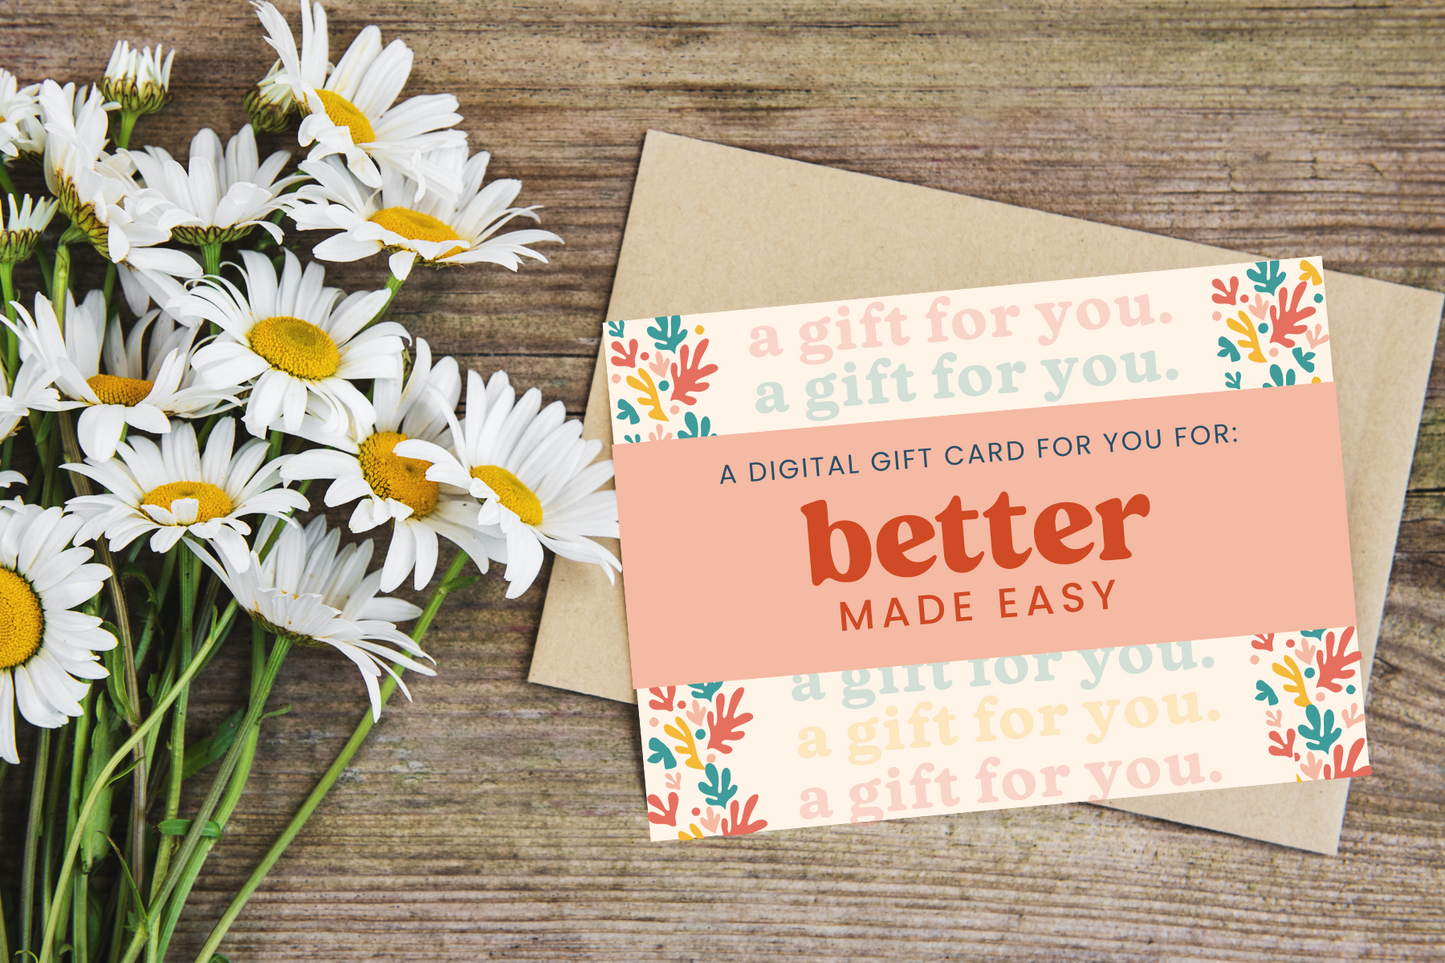 better made easy gift card gift card better made easy $10.00  -better made easy-eco-friendly-sustainable-gifting